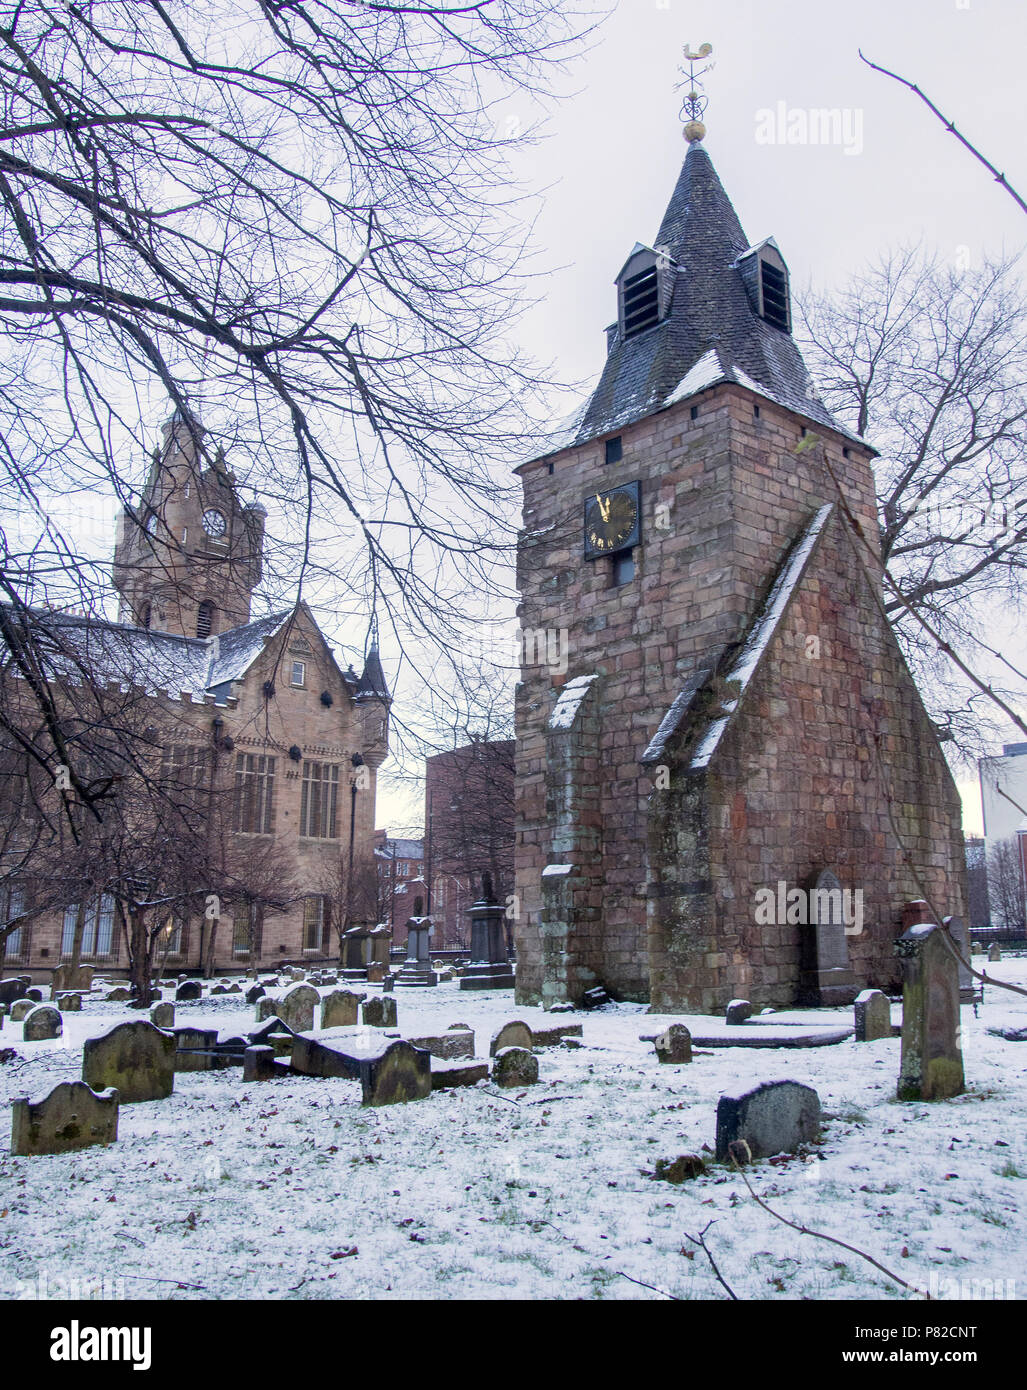 RUTHERGLEN, SCOTLAND - DECEMBER 29 2017: A side view of St. Mary’s steeple in the snow at the Old Parish Church graveyard. Stock Photo